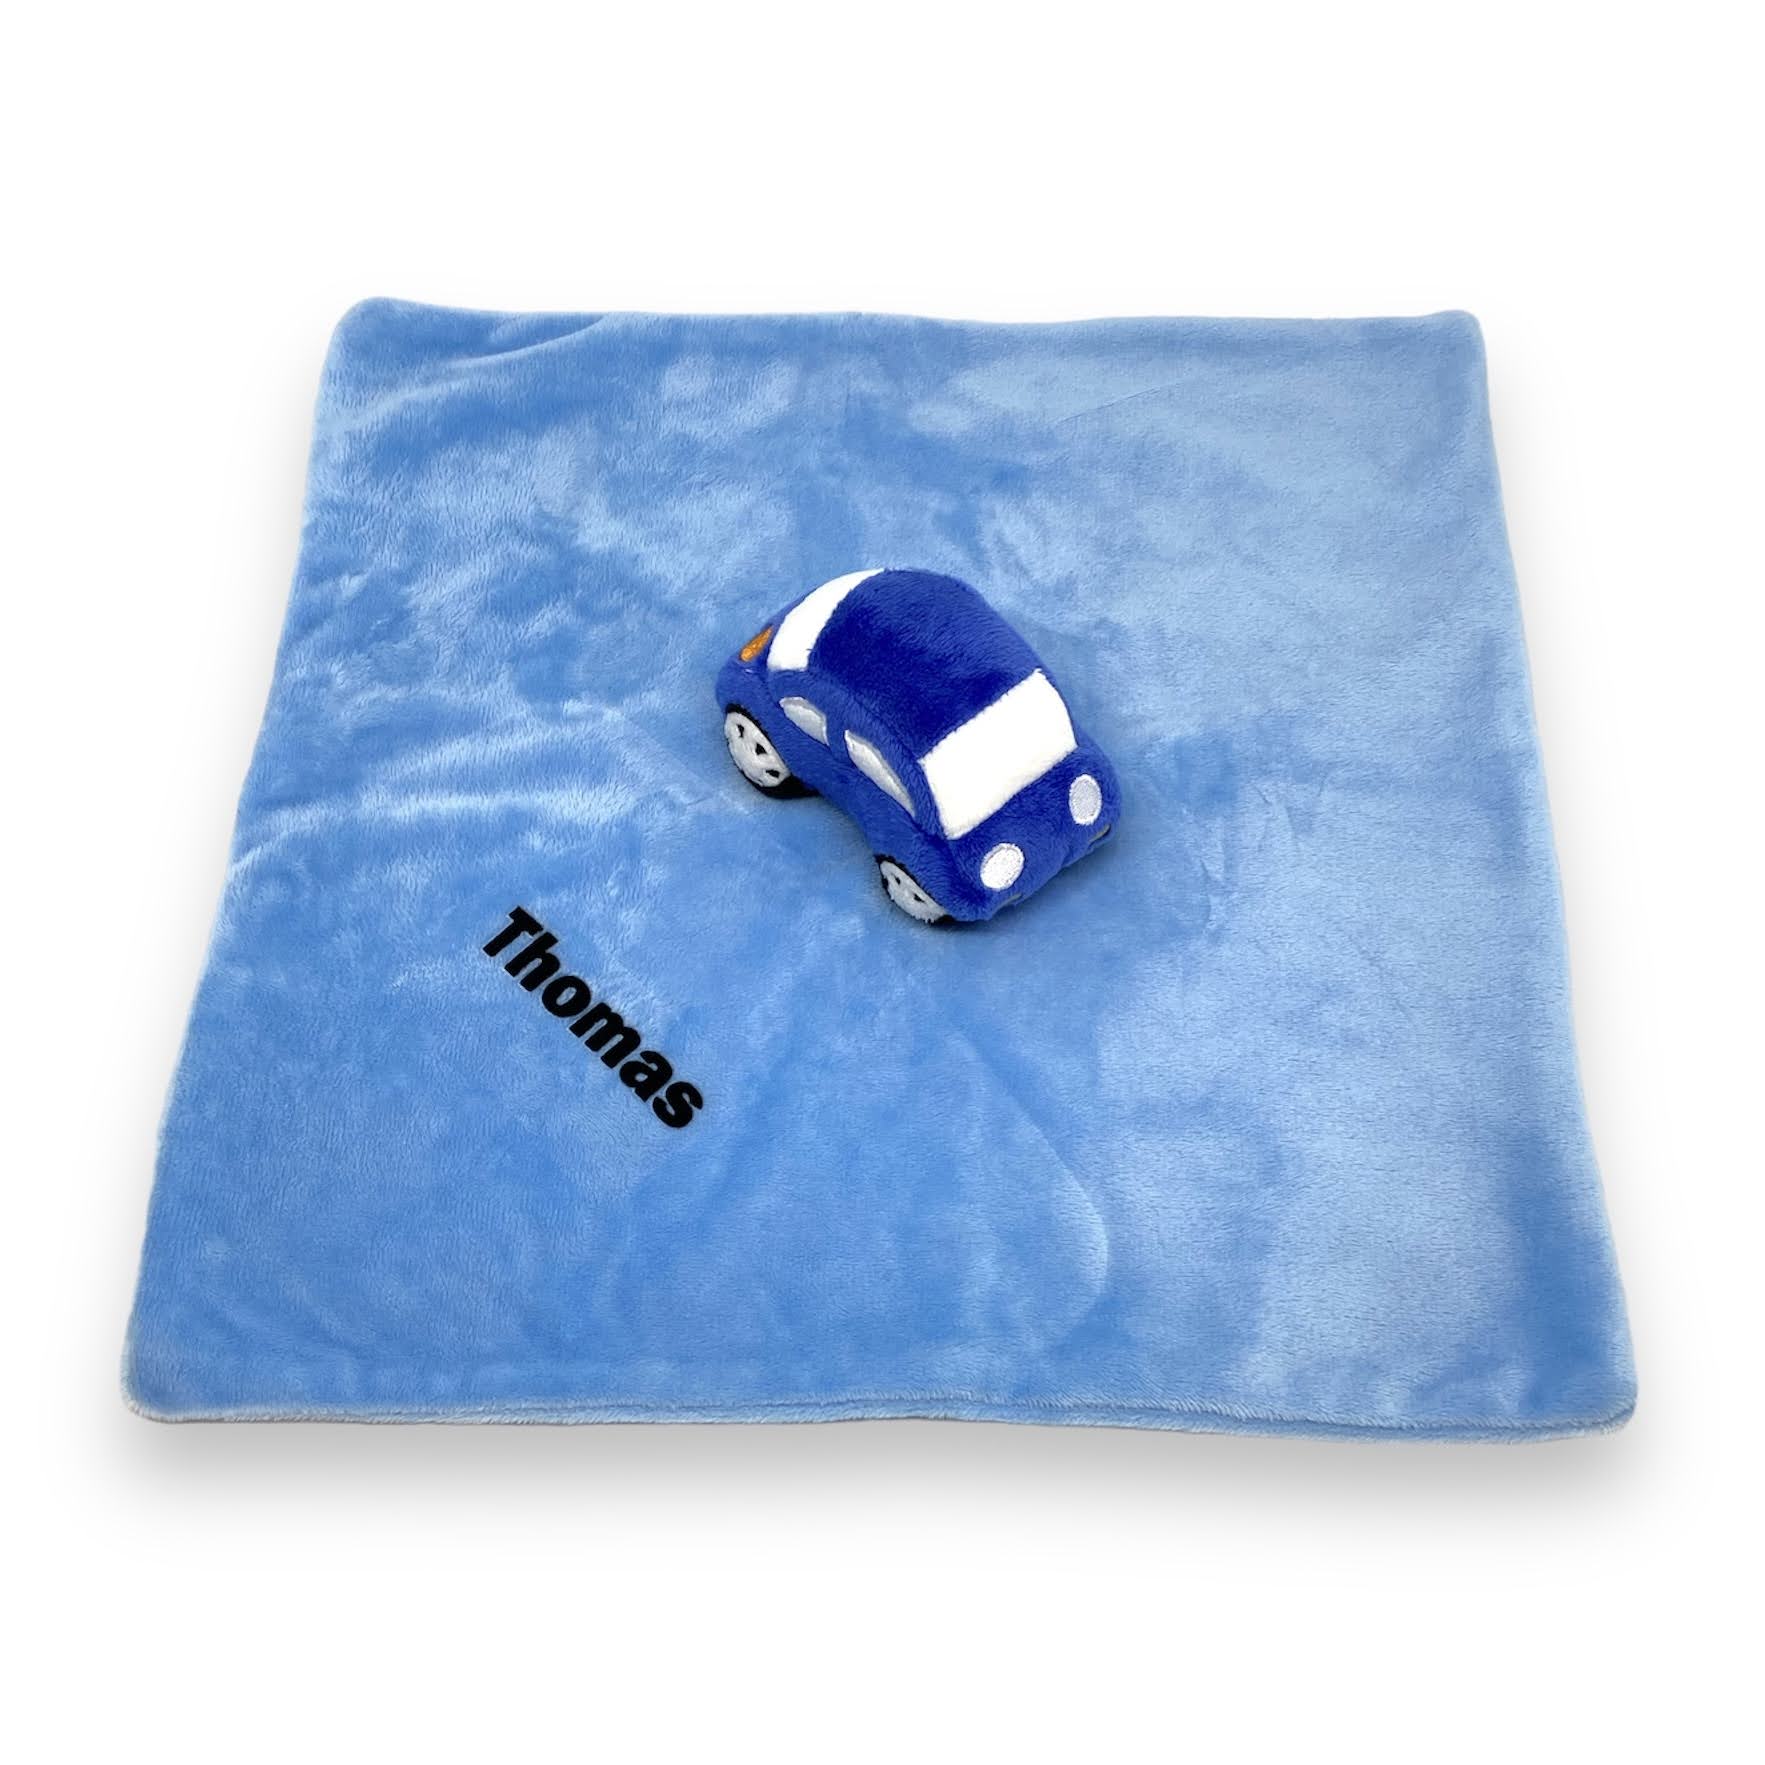 Unique car-themed comforter personalised for your Kids' enjoyment